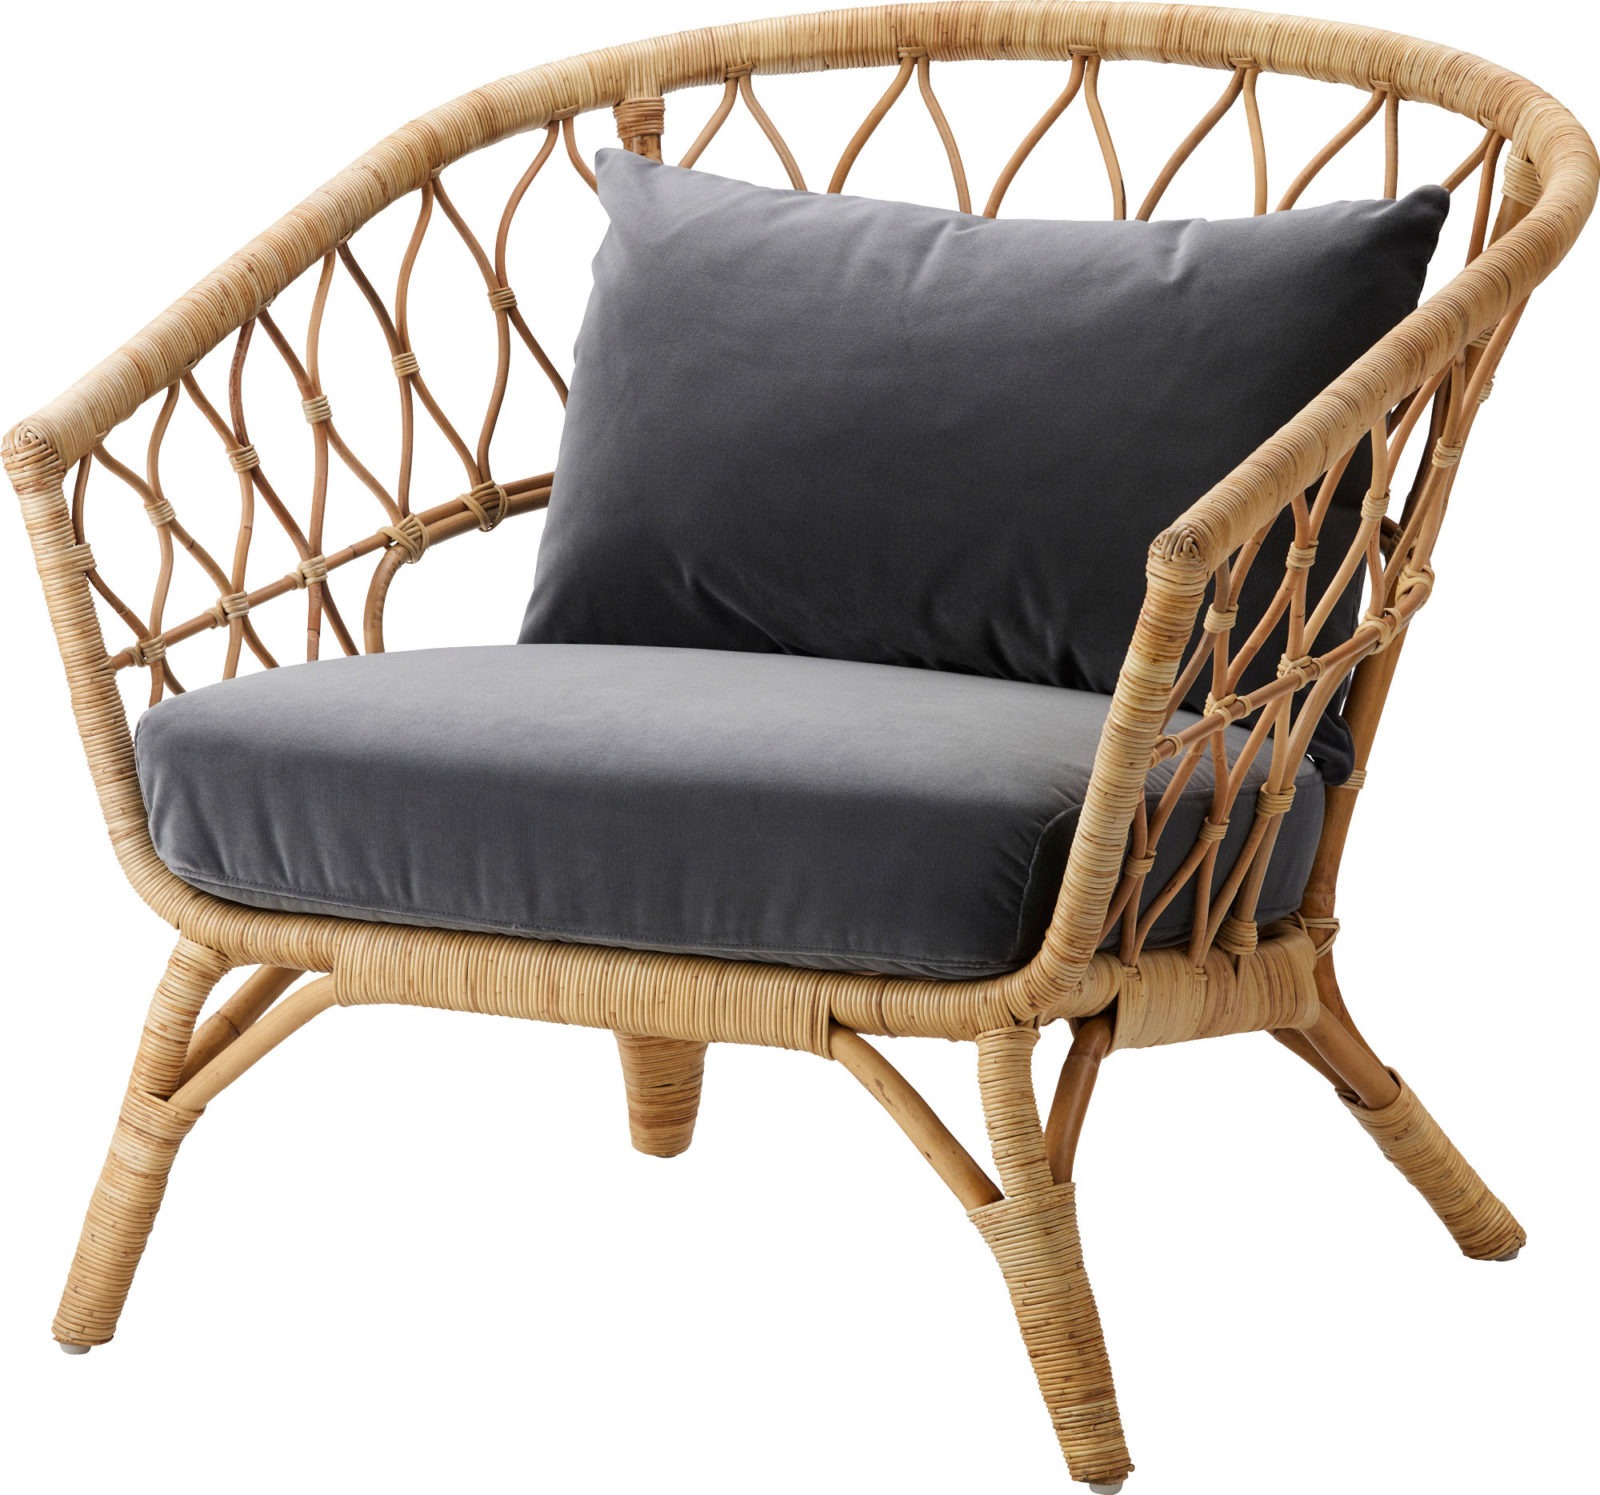 A neat handmade rattan armchair with a generous shape and dark grey cushions.